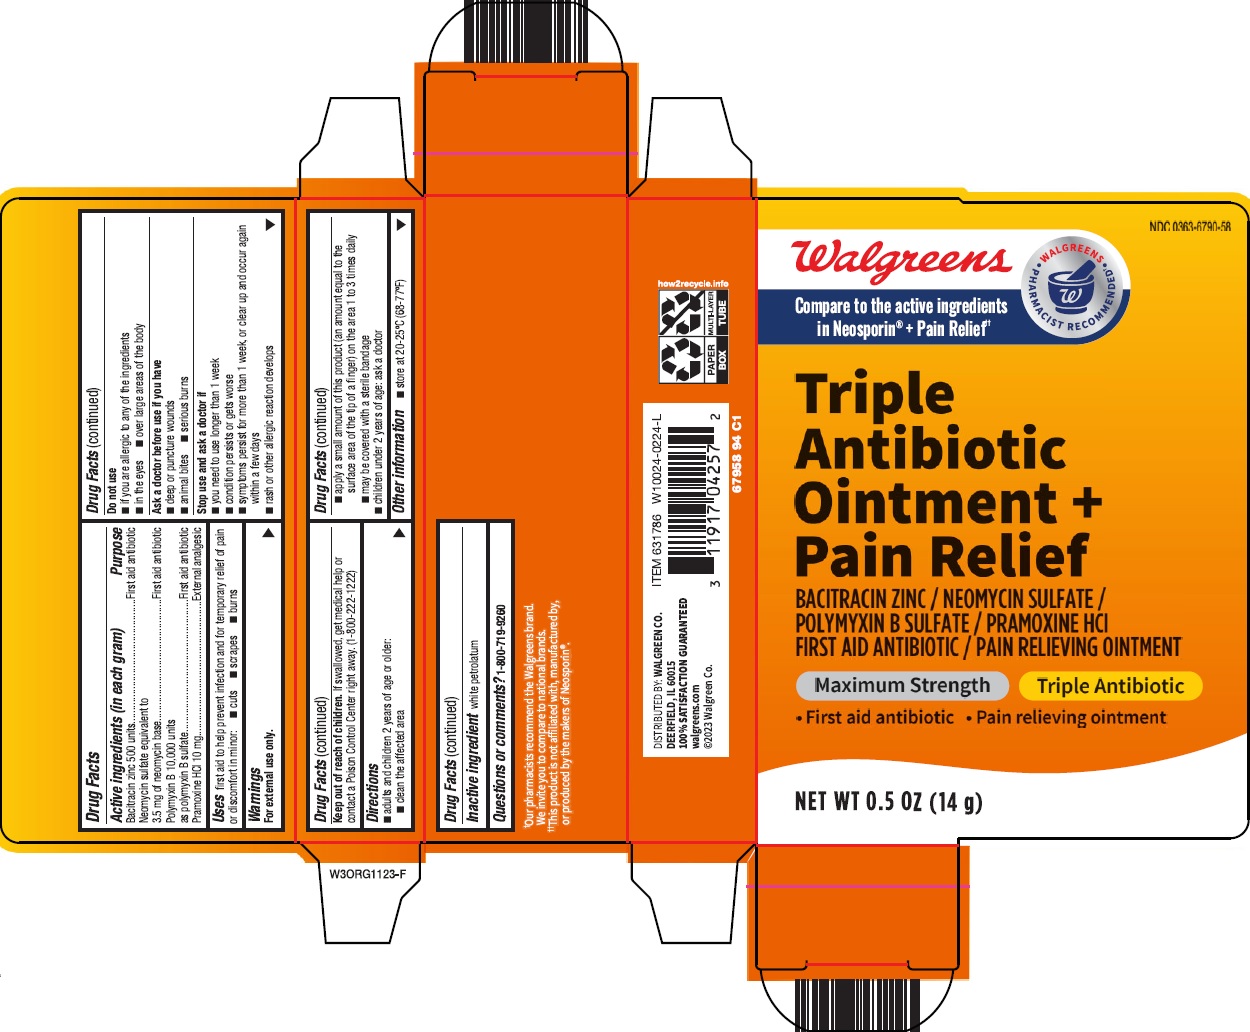 679-94-triple-antibiotic-ointment-pain-relief